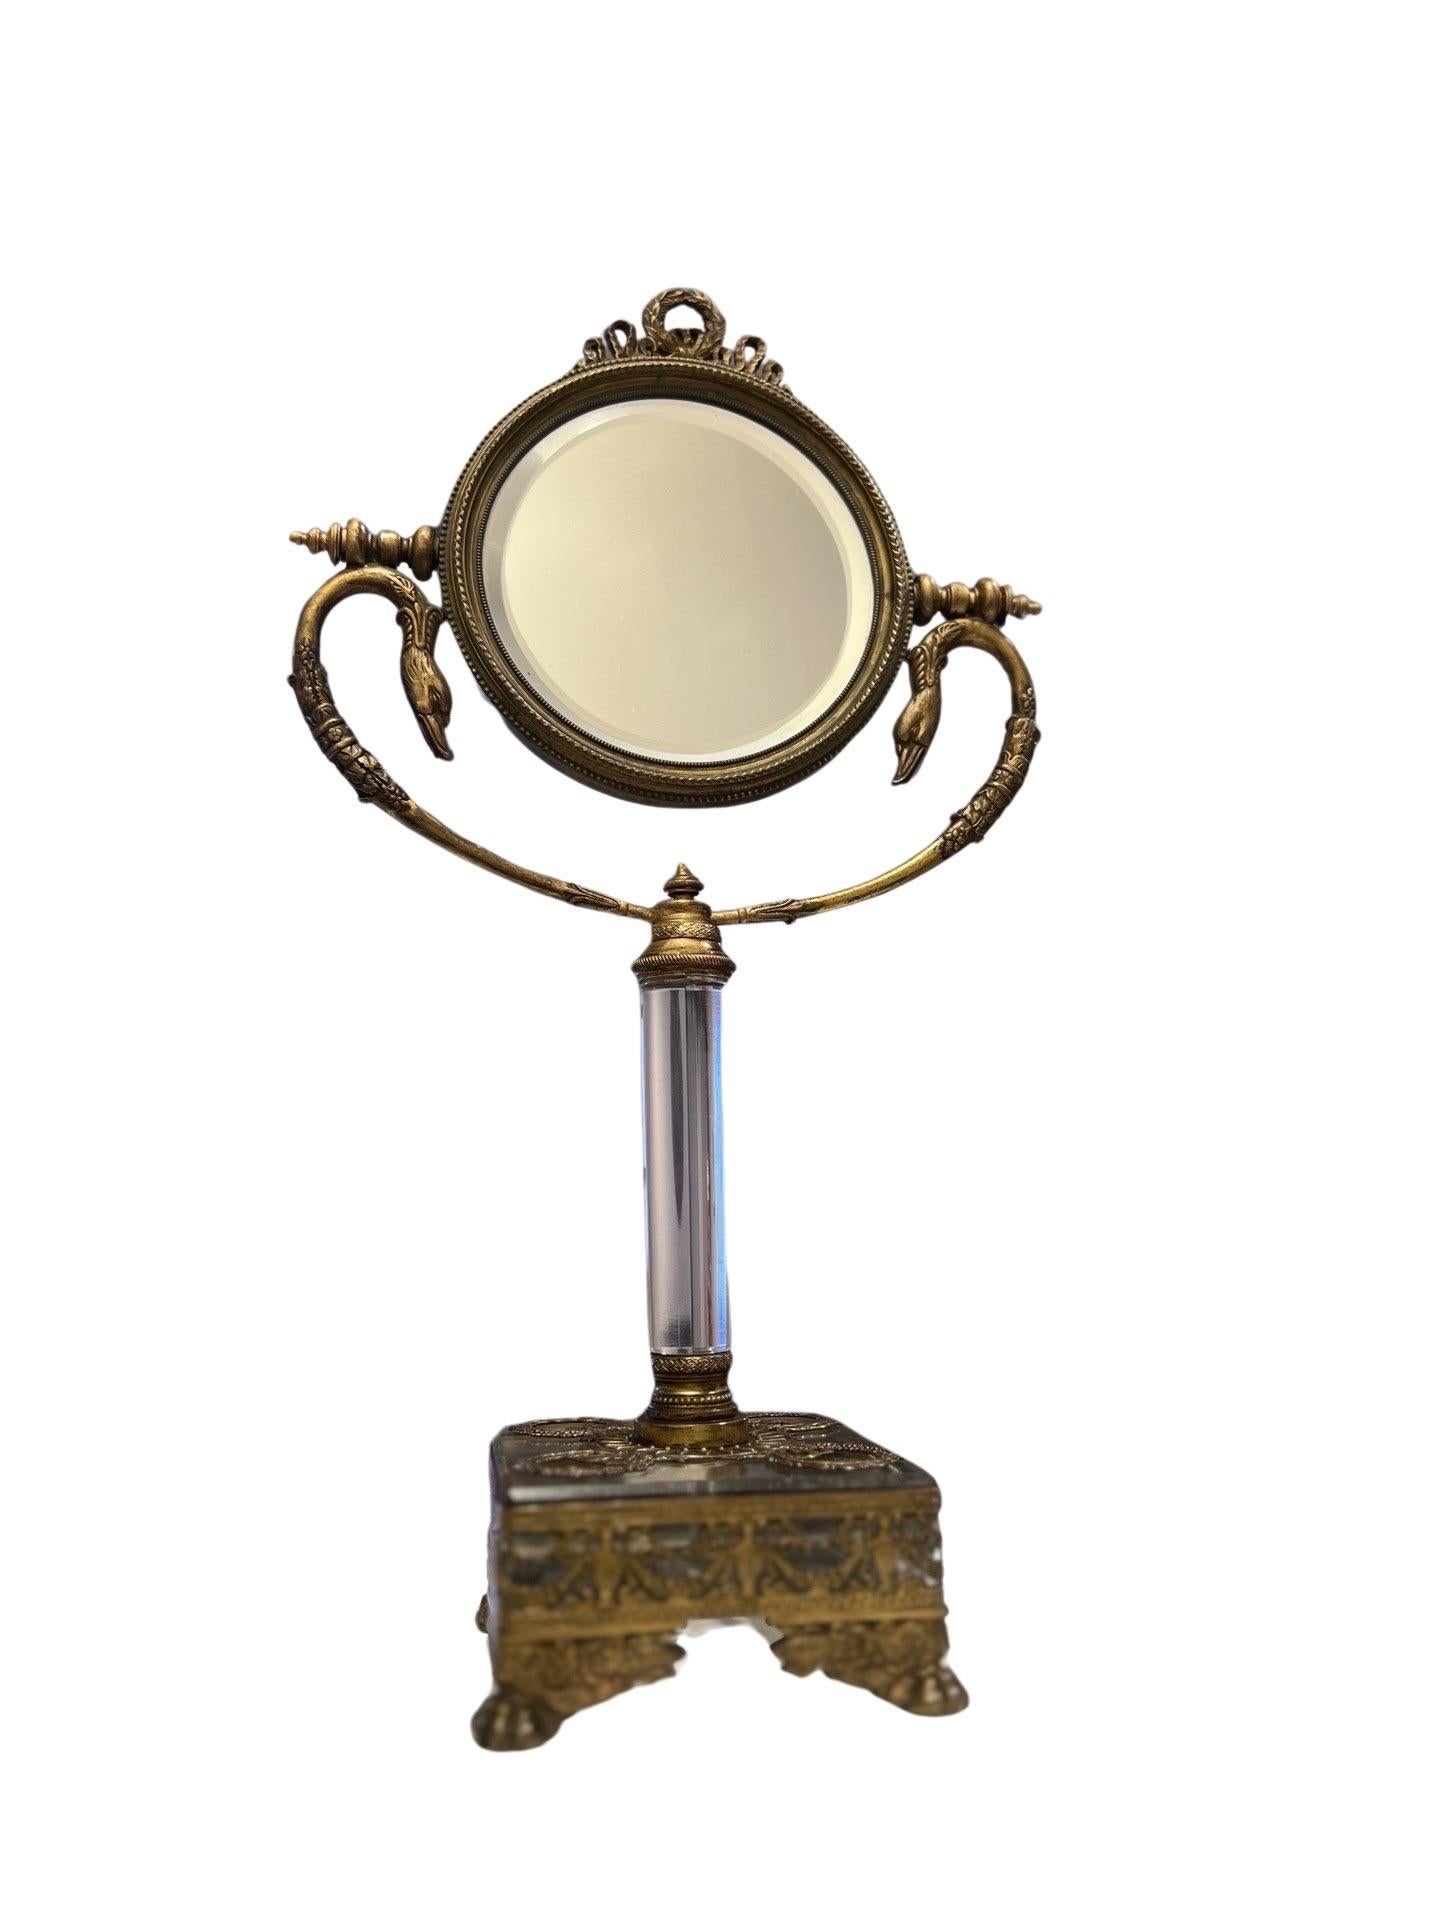 French, early to mid 19th century.

A stunning French Neoclassical vanity mirror. Atop the beautiful beveled glass (double sided) mirror is a laurel wreath finial, opposing swan head forms supports and acanthus leaf detailing. A central glass stem